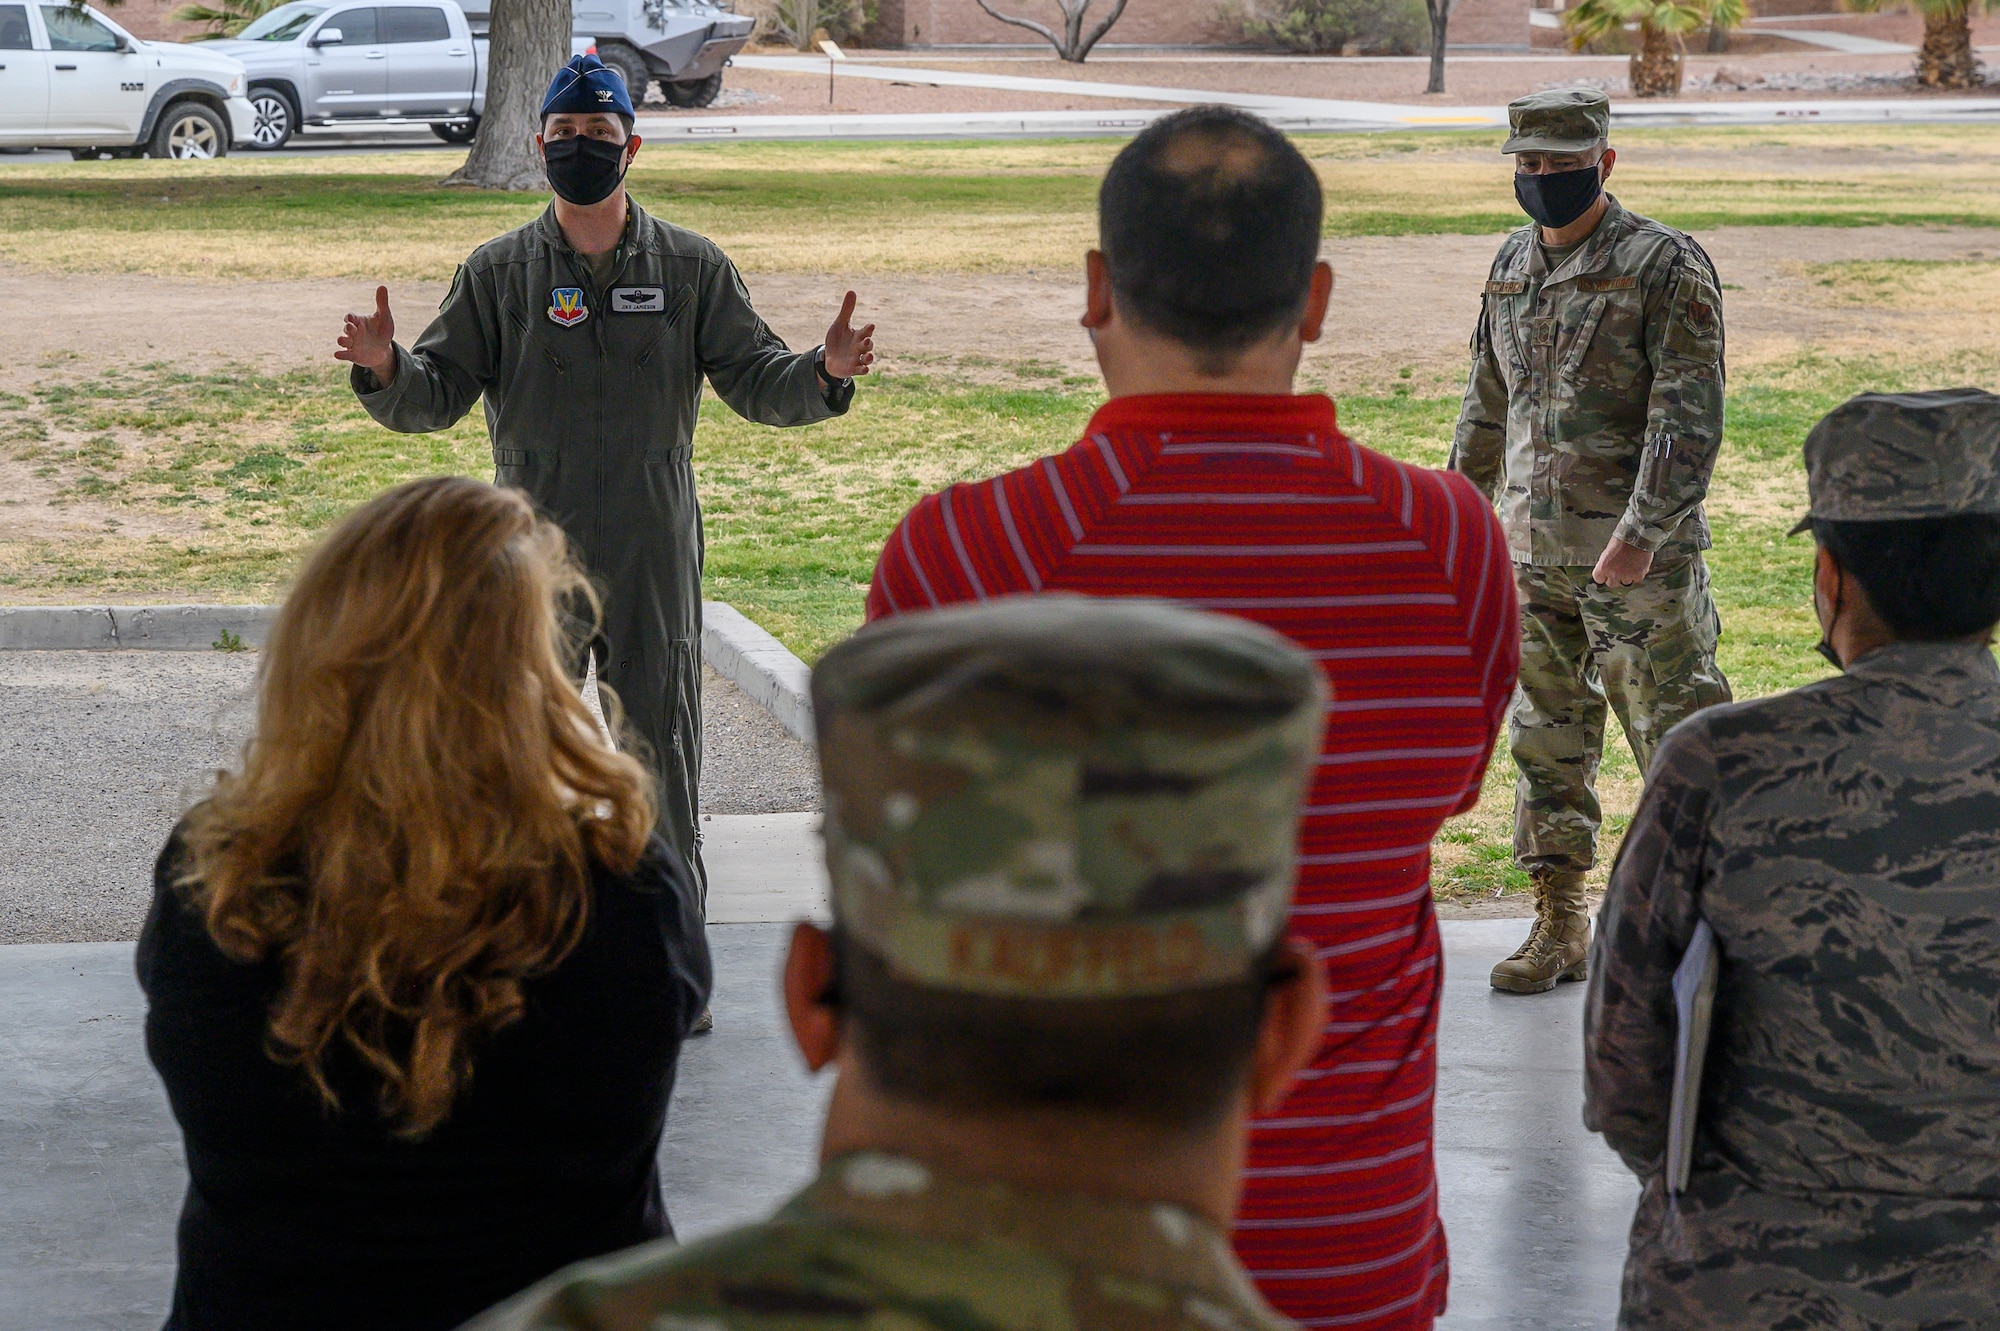 Col. Kevin Jamieson, 57th Wing vice commander talking to people